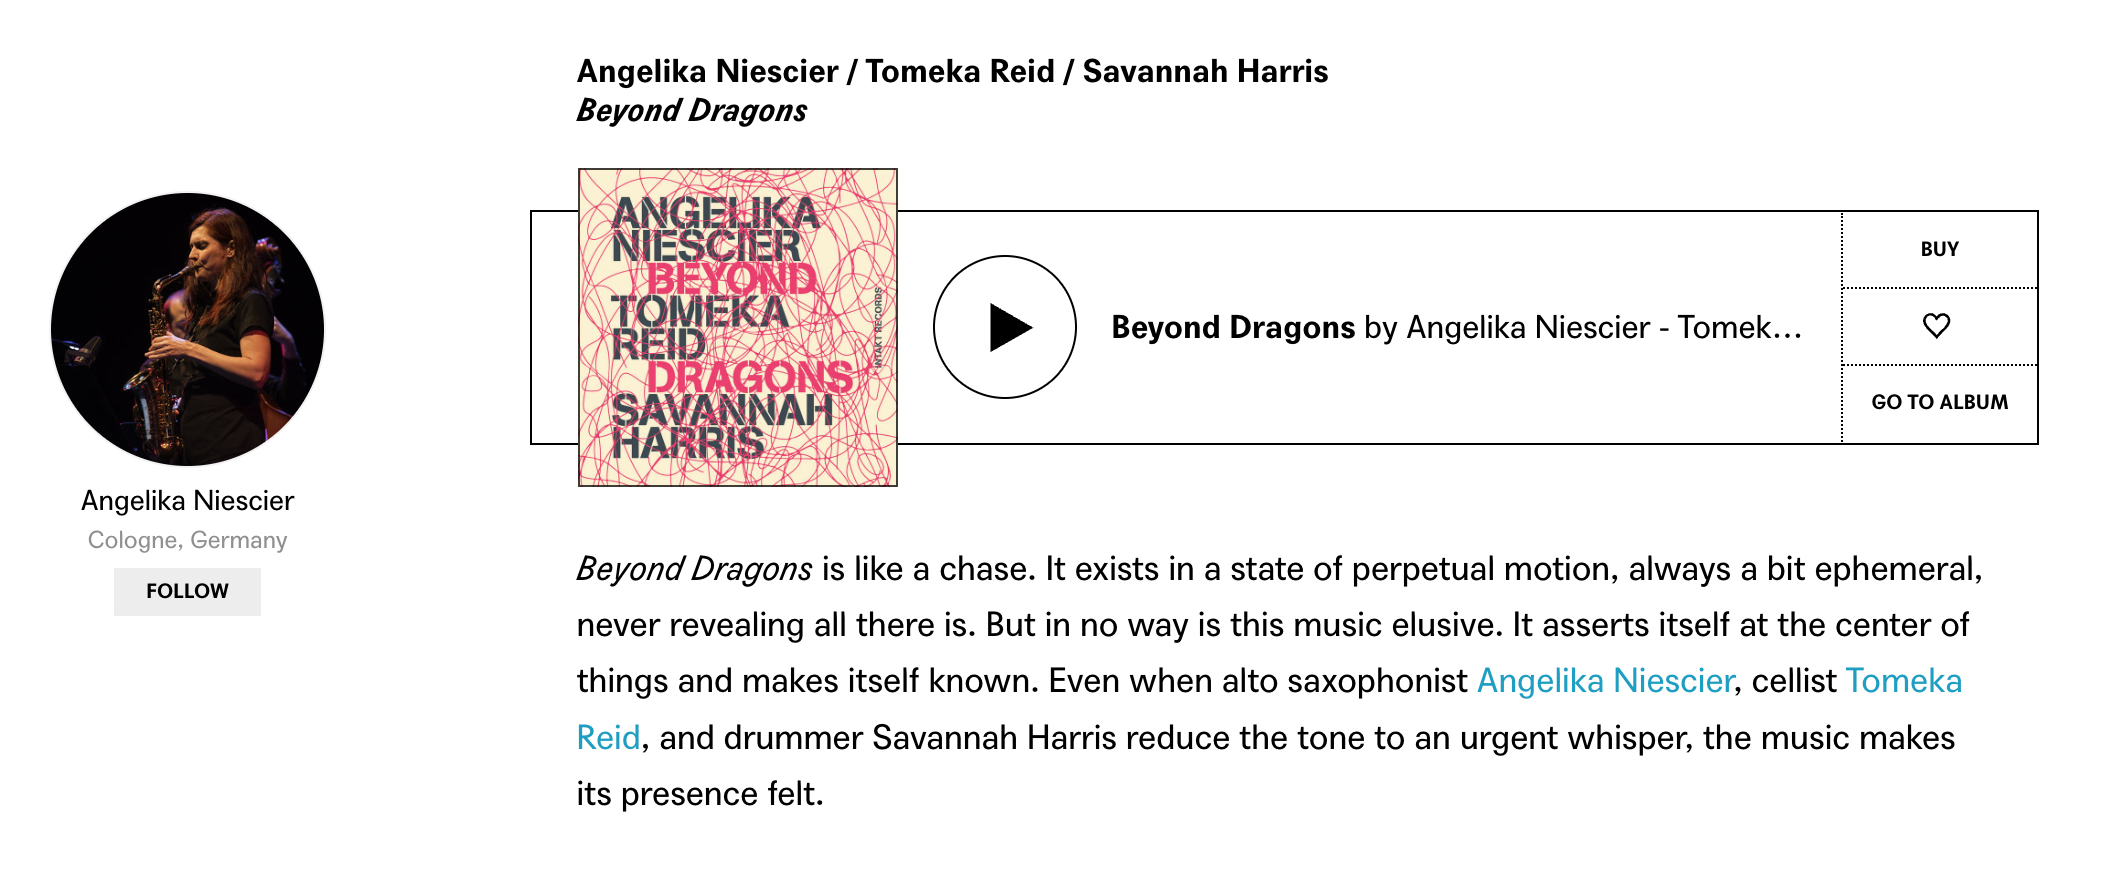 Beyond Dragons is like a chase. It exists in a state of perpetual motion, always a bit ephemeral, never revealing all there is. But in no way is this music elusive. It asserts itself at the center of things and makes itself known. Even when alto saxophonist Angelika Niescier, cellist Tomeka Reid, and drummer Savannah Harris reduce the tone to an urgent whisper, the music makes its presence felt.